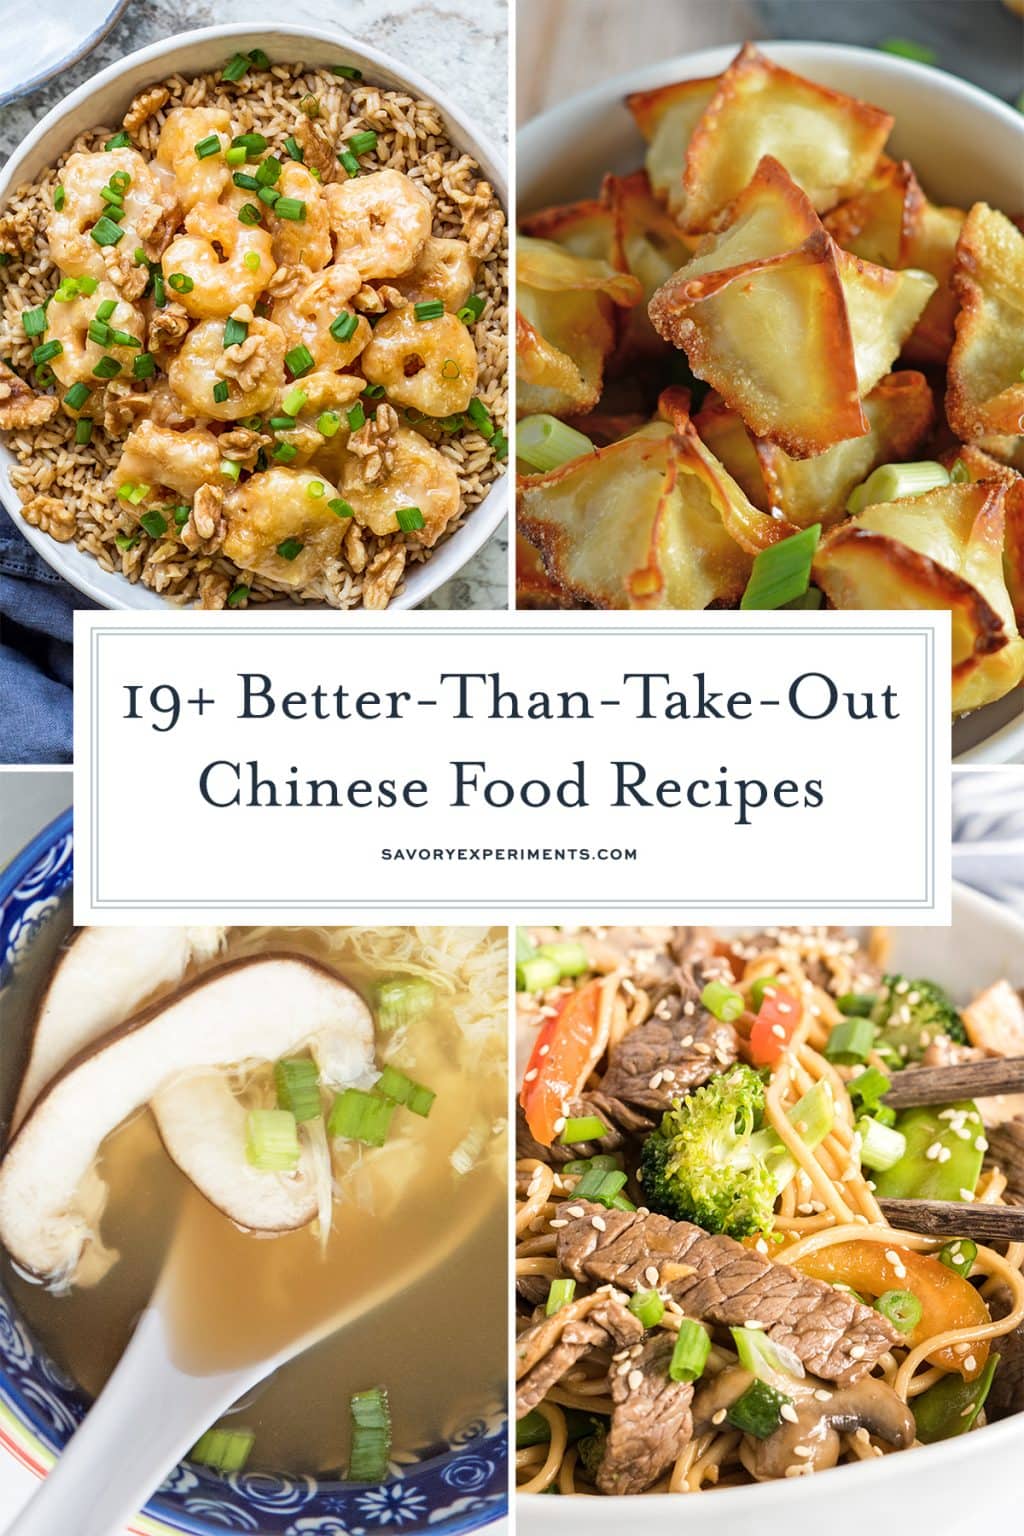 19+ Better-Than-Take-Out Chinese Food Recipes- Easy & Delicious!